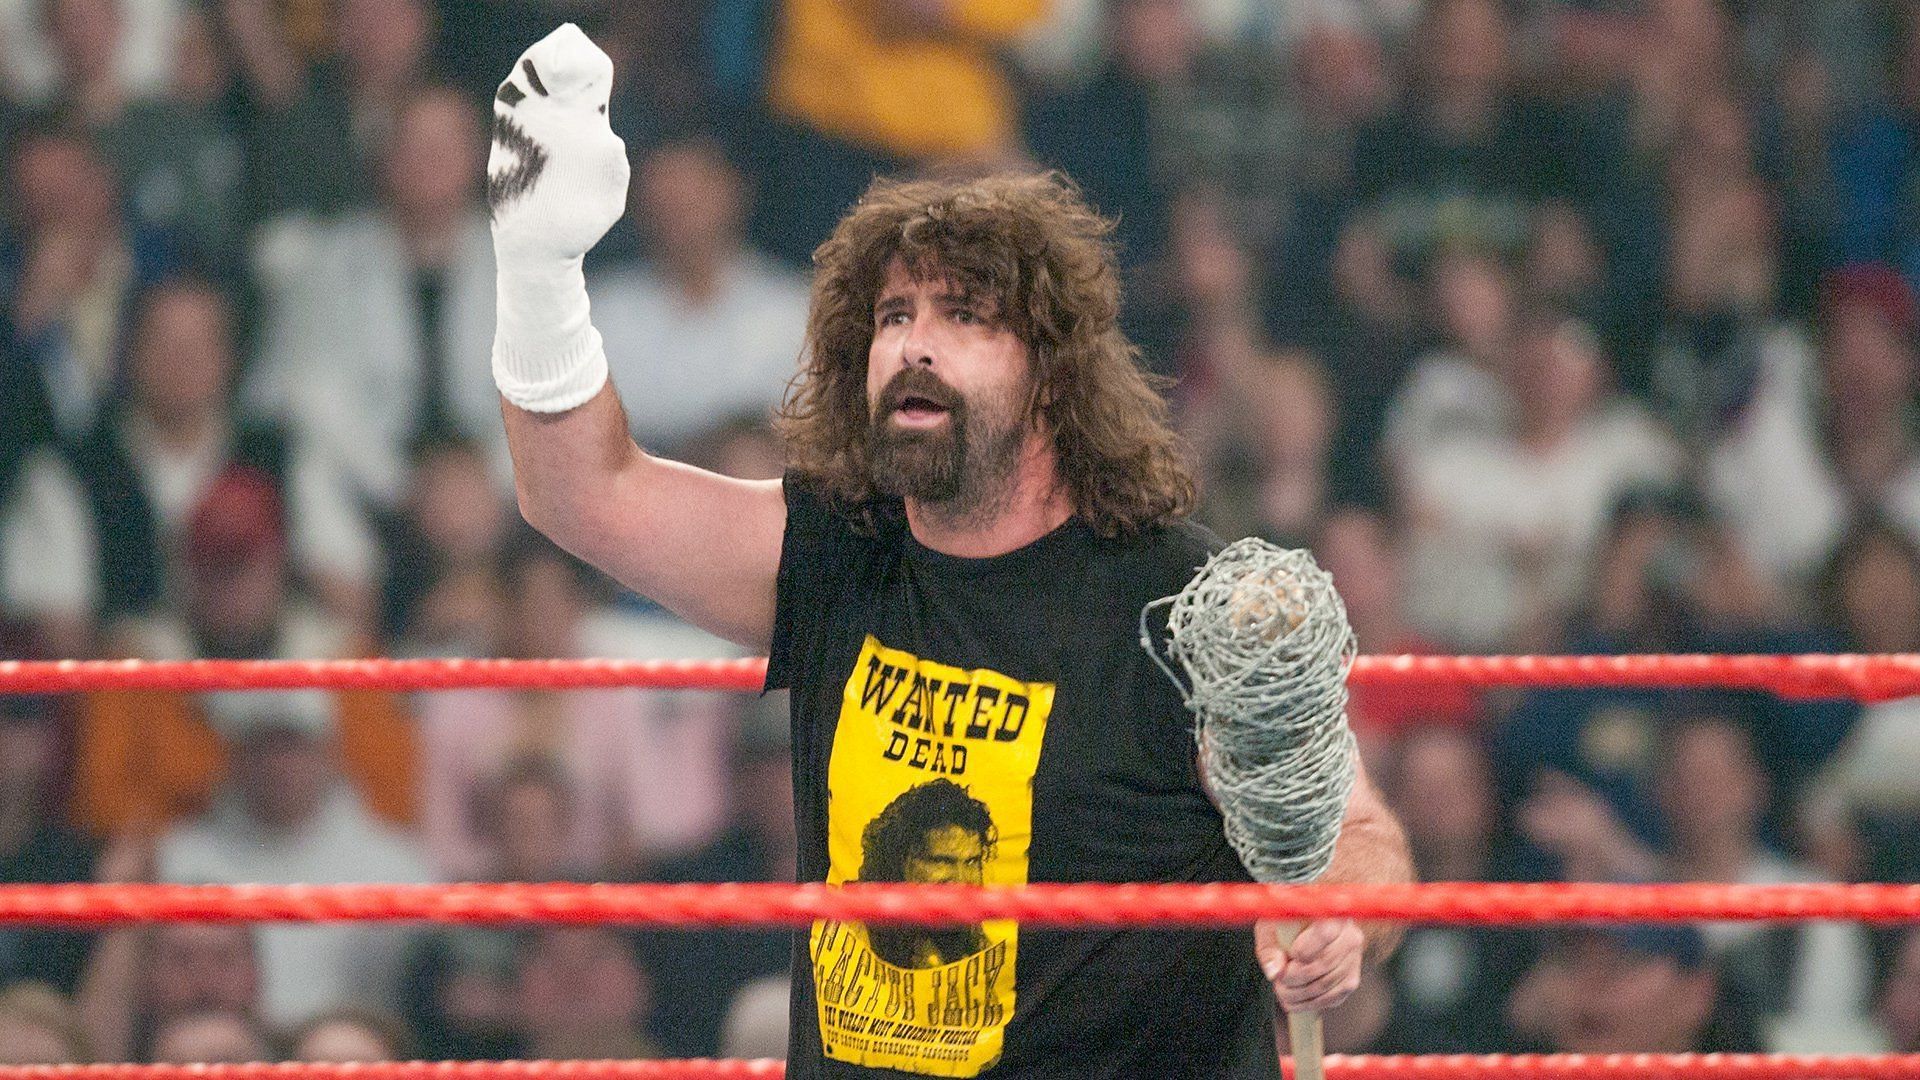 Mick Foley stands tall for the WWE Universe